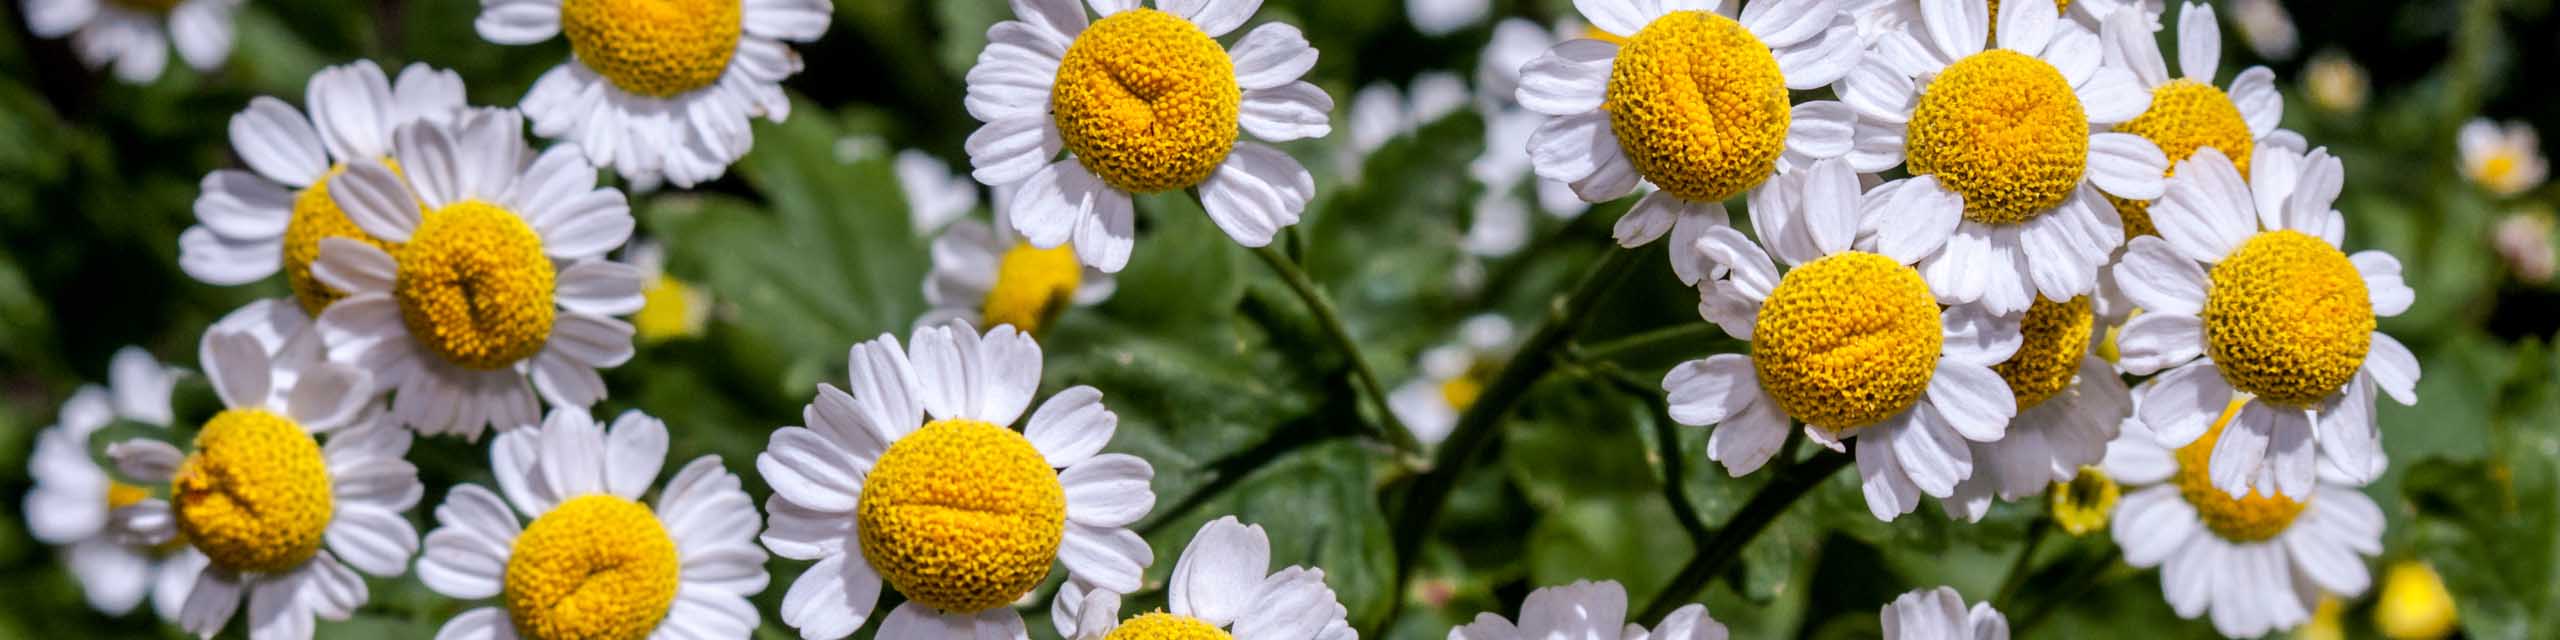 Close up of white daisy-like flowers of feverfew.